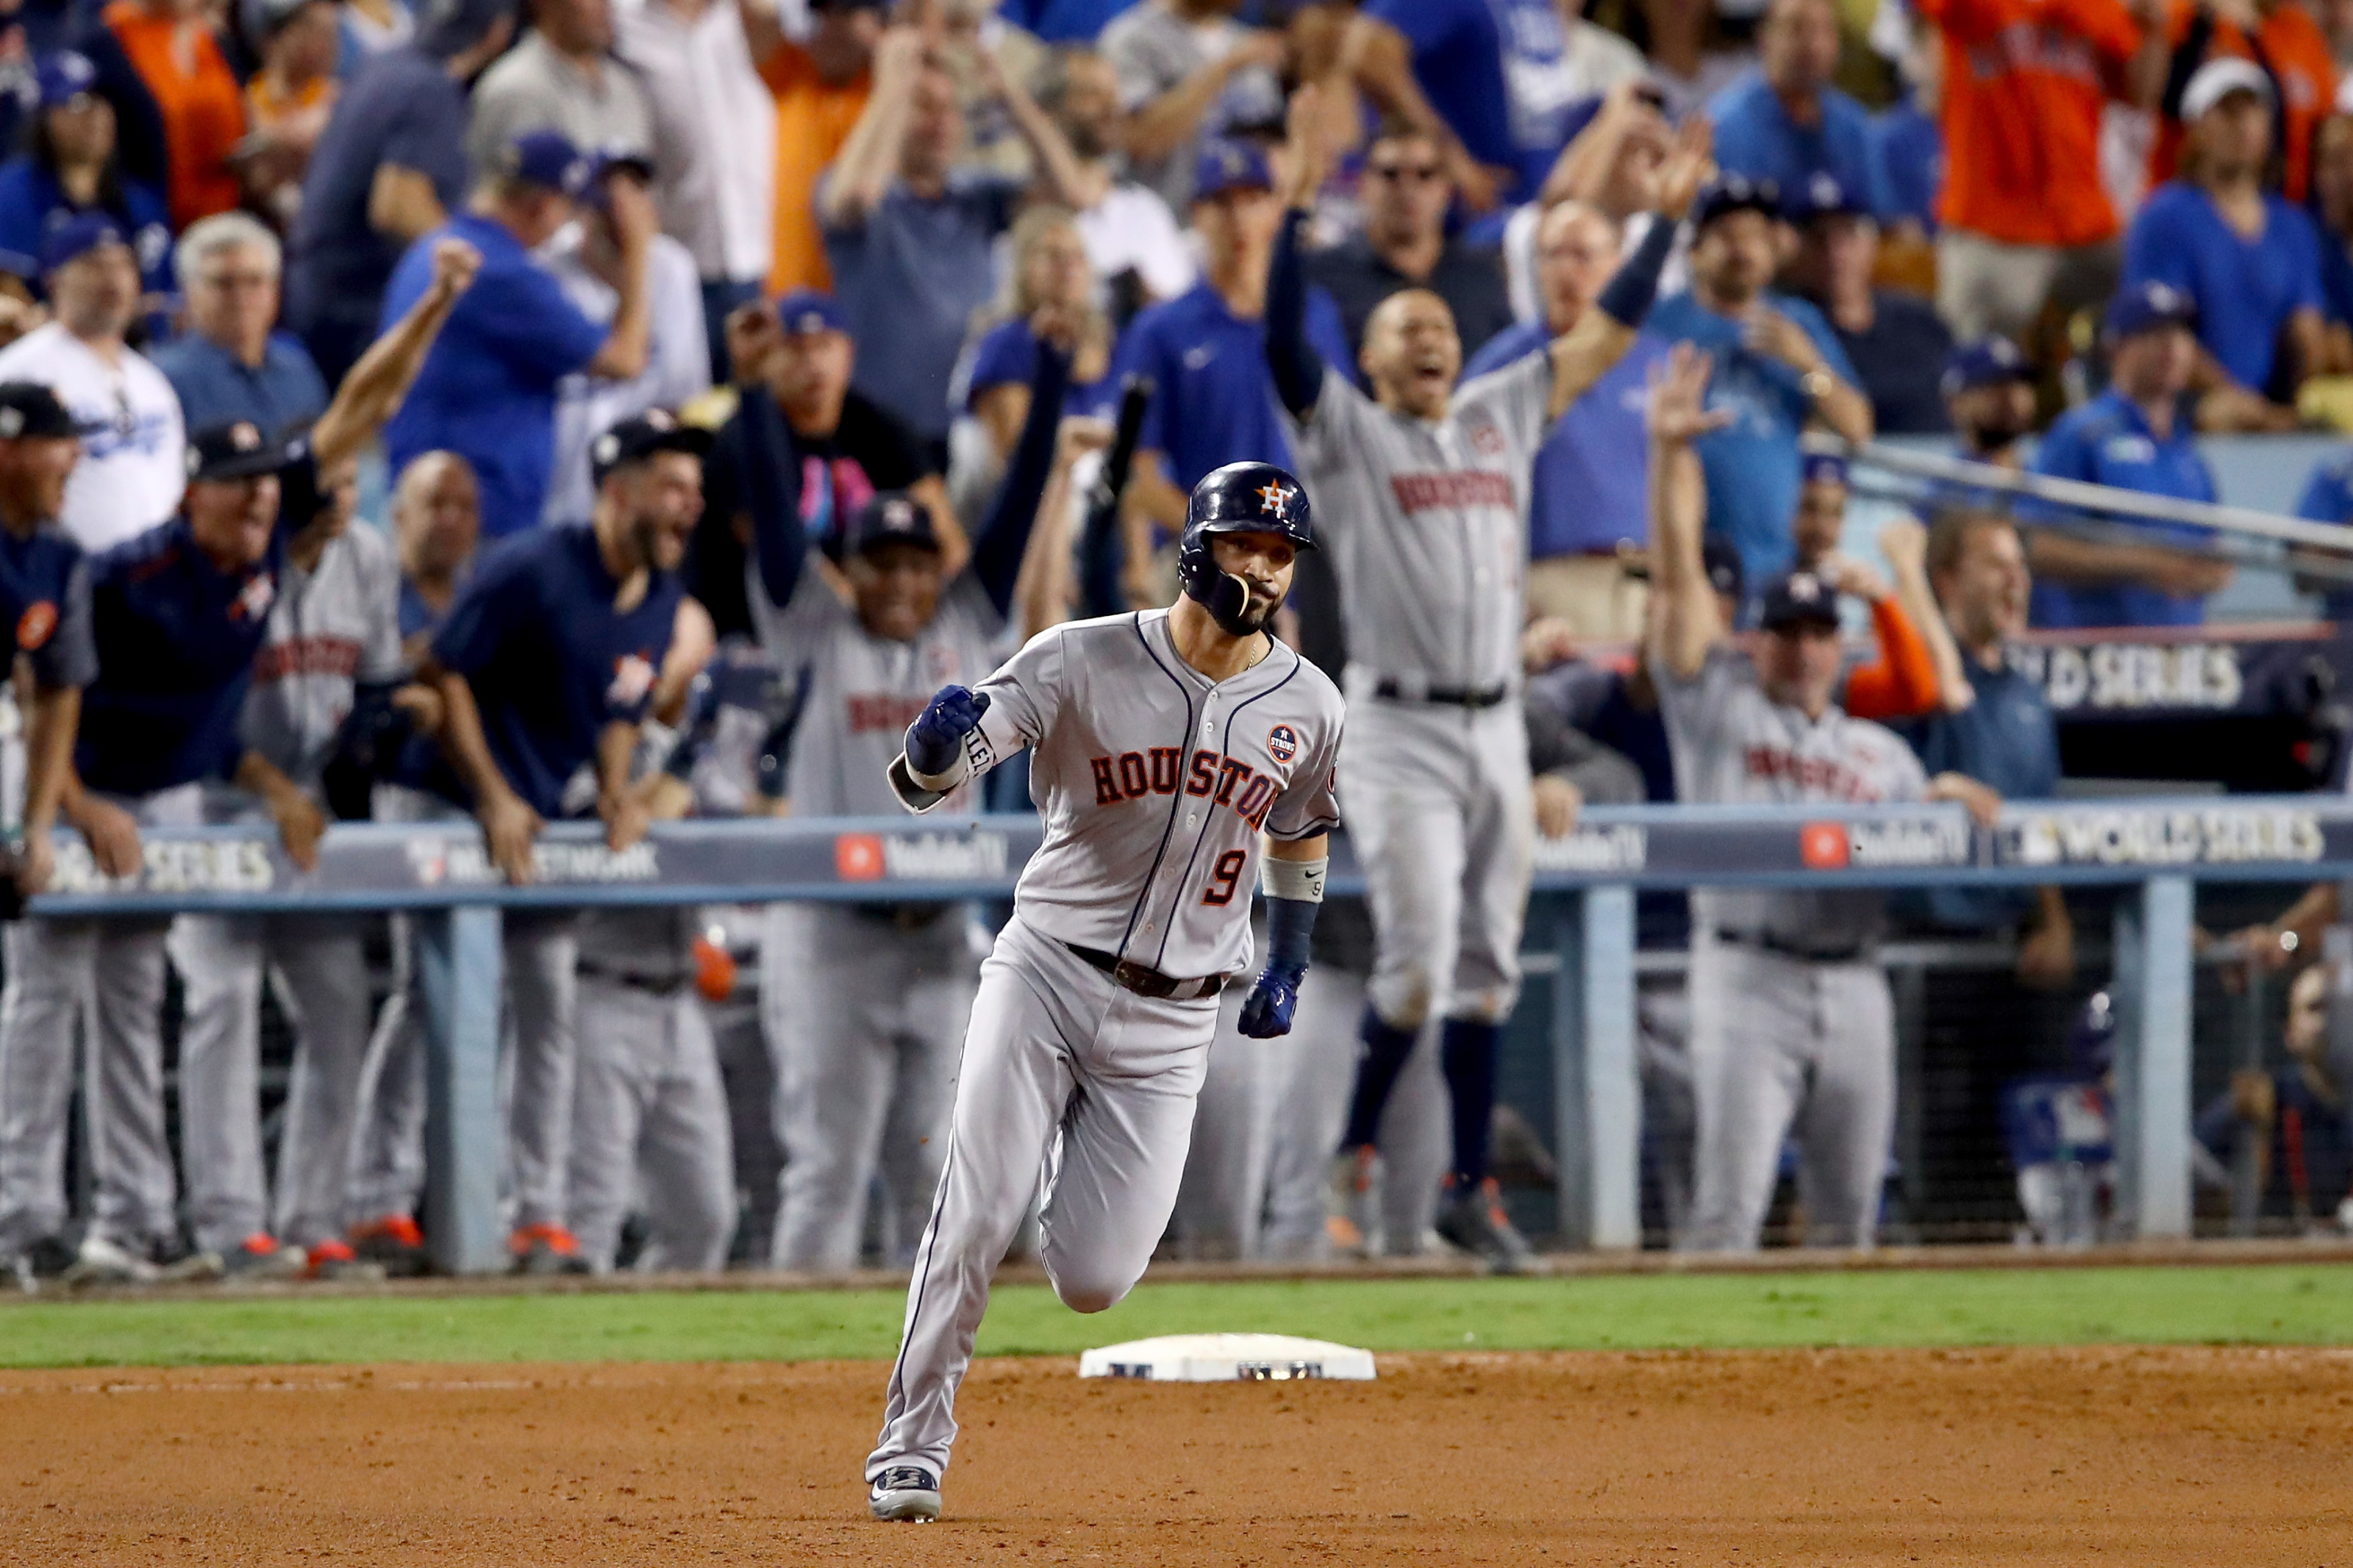 Houston Astros: 3 reasons MarGo's WS homer is best in franchise history